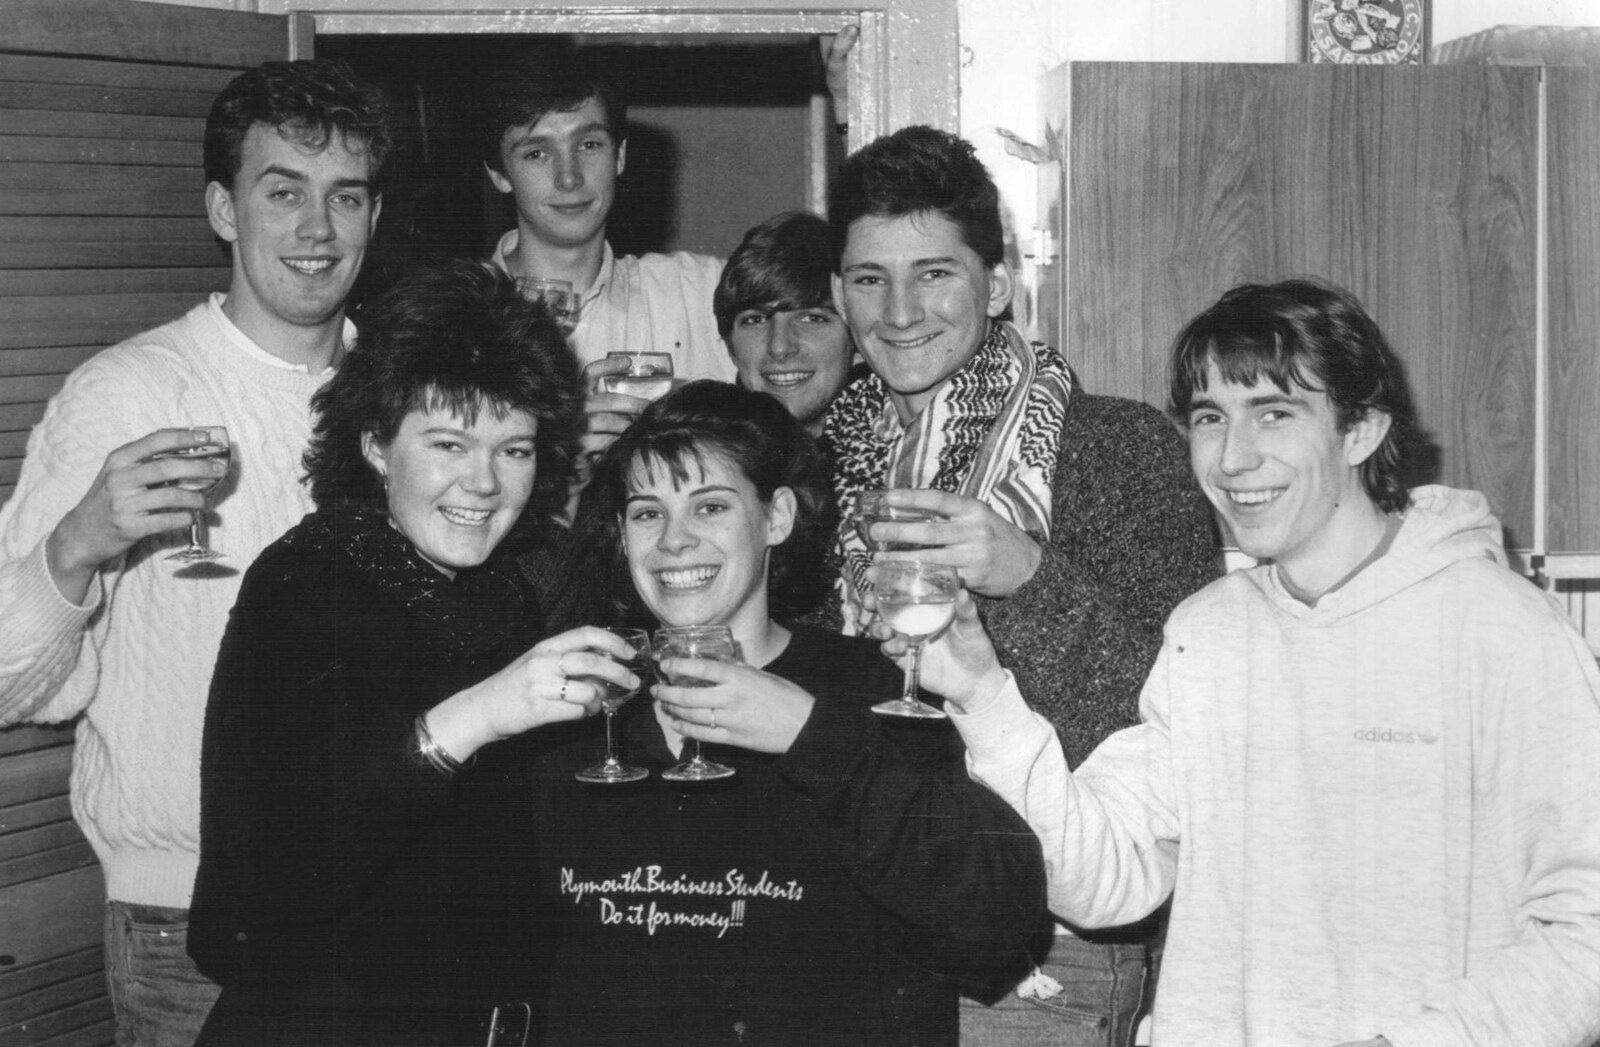 A group photo after the tasting session from Uni: The Plymouth Polytechnic Satique Project, Salcombe and Plymouth - 10th May 1986